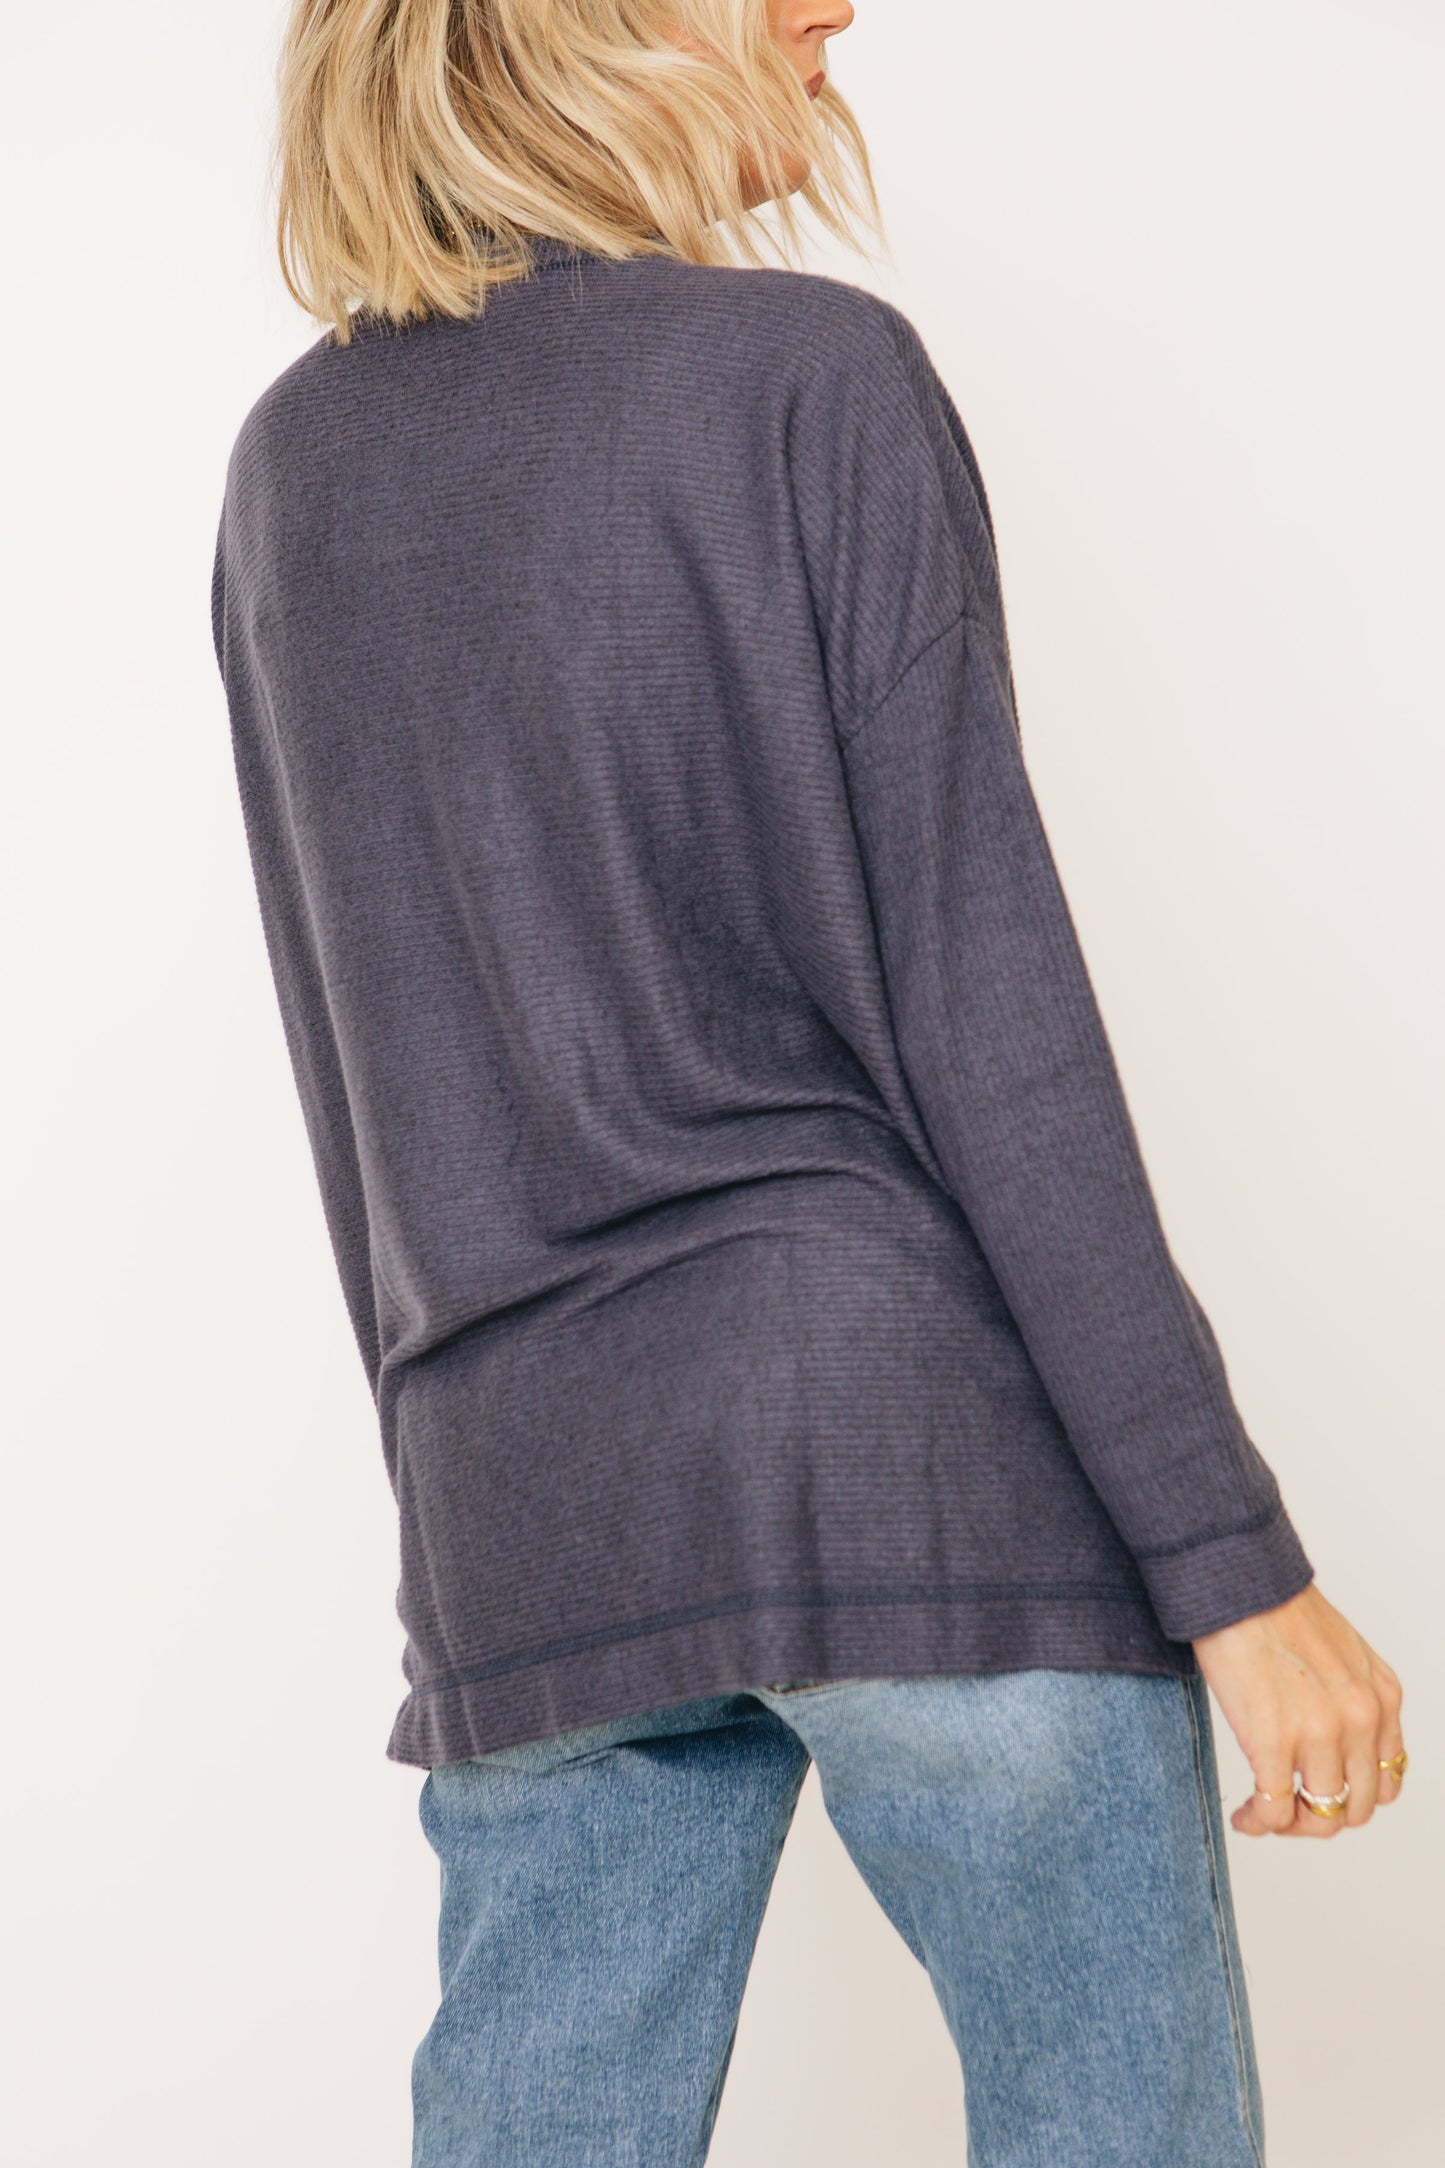 Solid Long Sleeve Crew Neck Top (S-3XL)